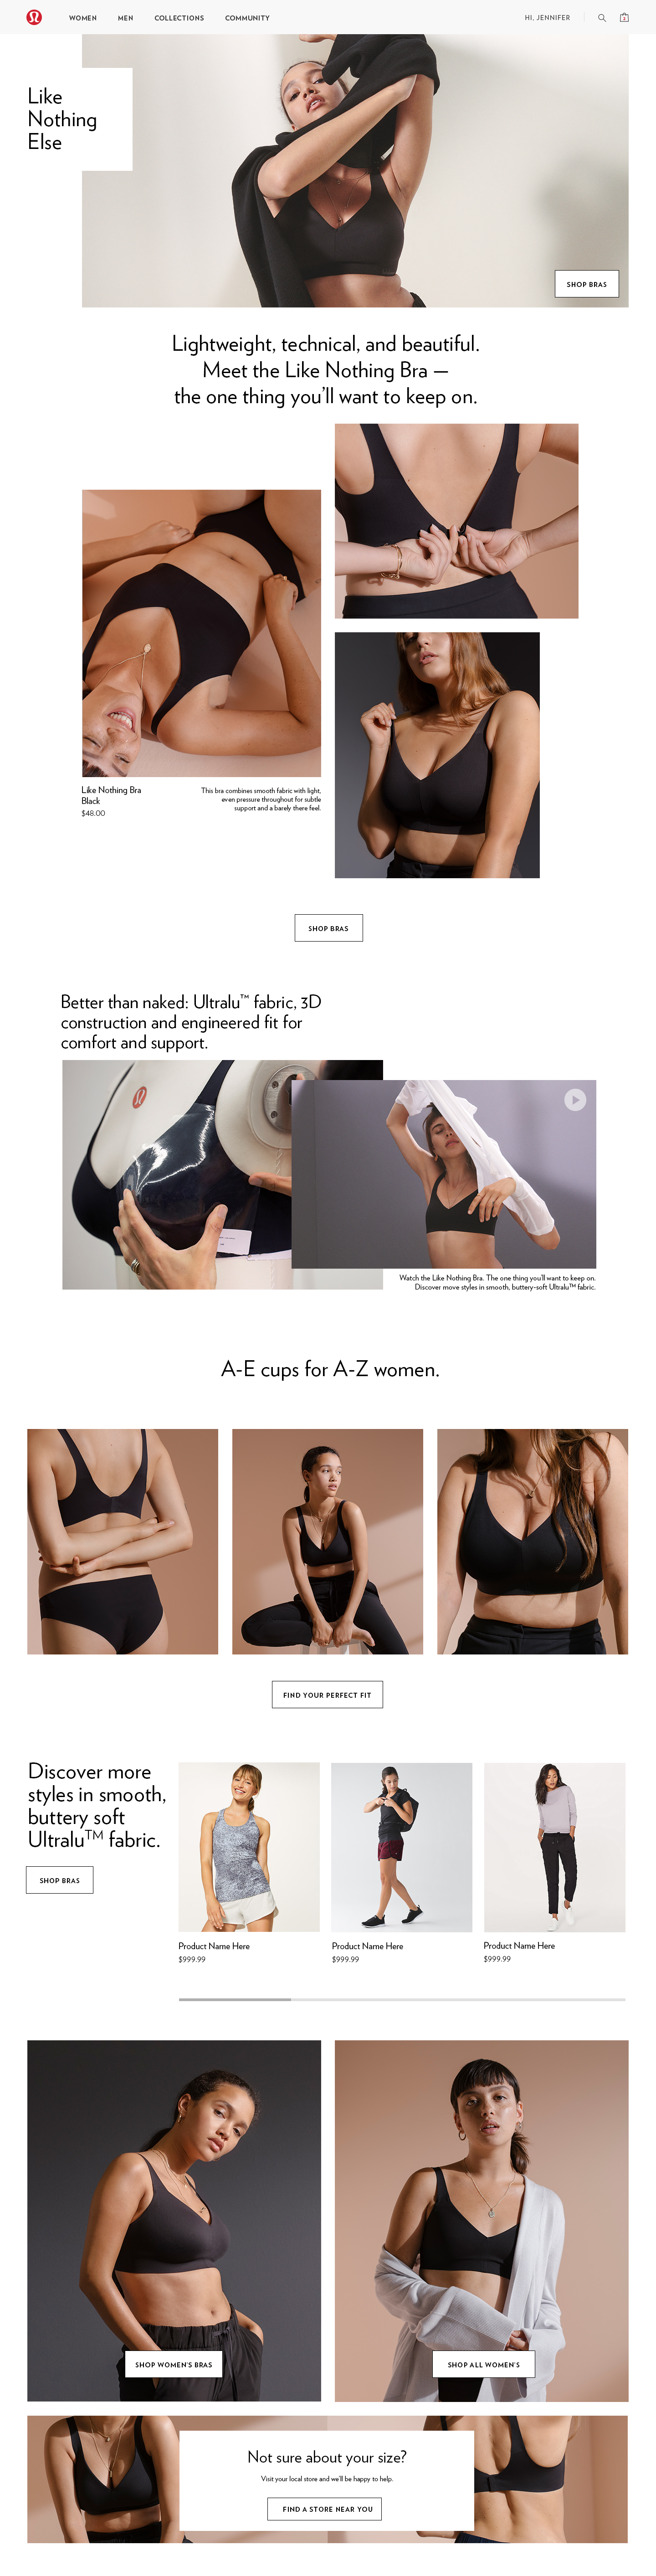 Client: Lululemon Like Nothing bra - Good Intentions